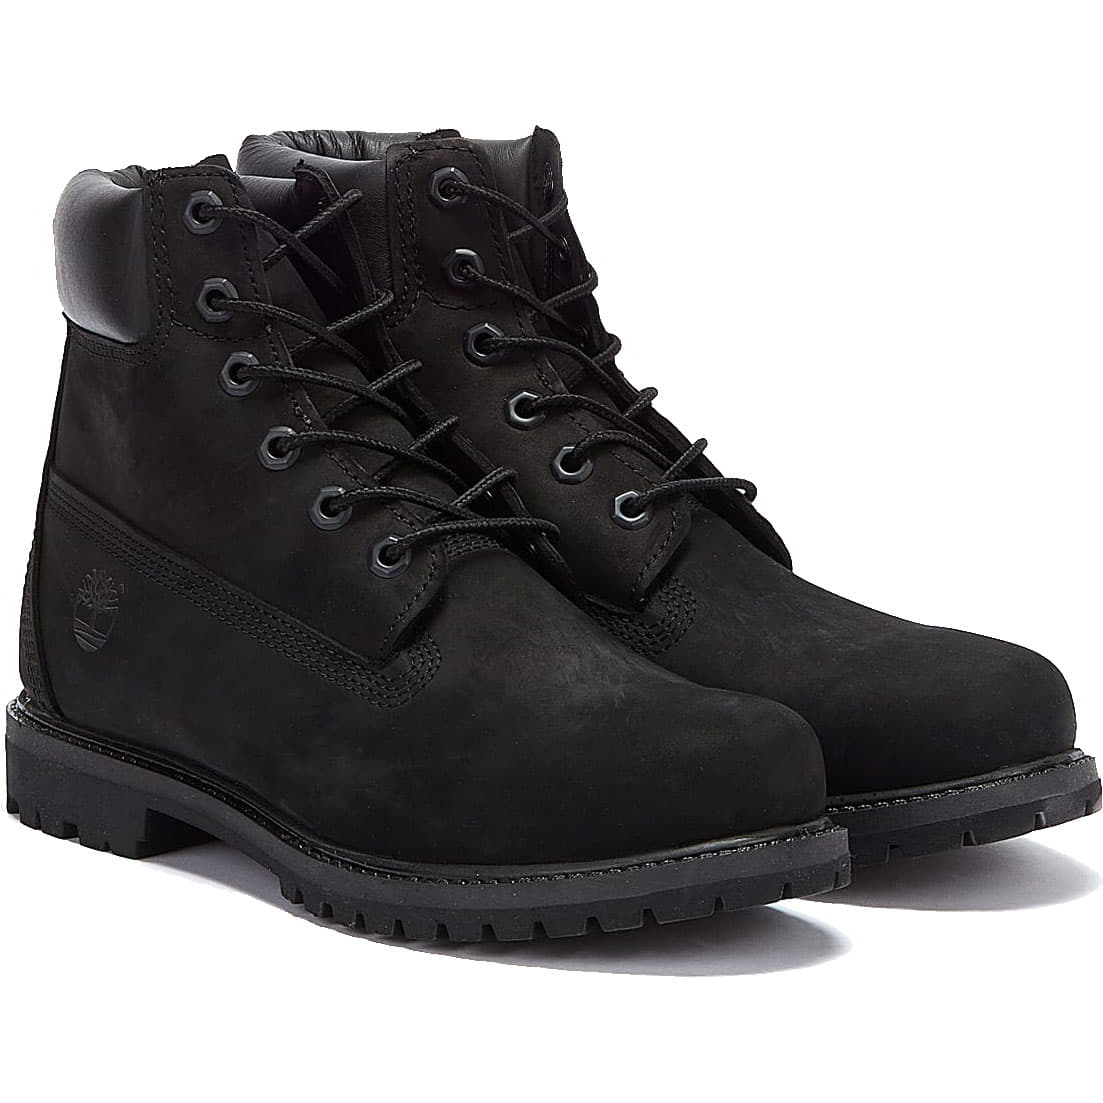 Timberland Icon Women's 6 Inch Premium Waterproof Boots Wide Fit - Black - UK 8